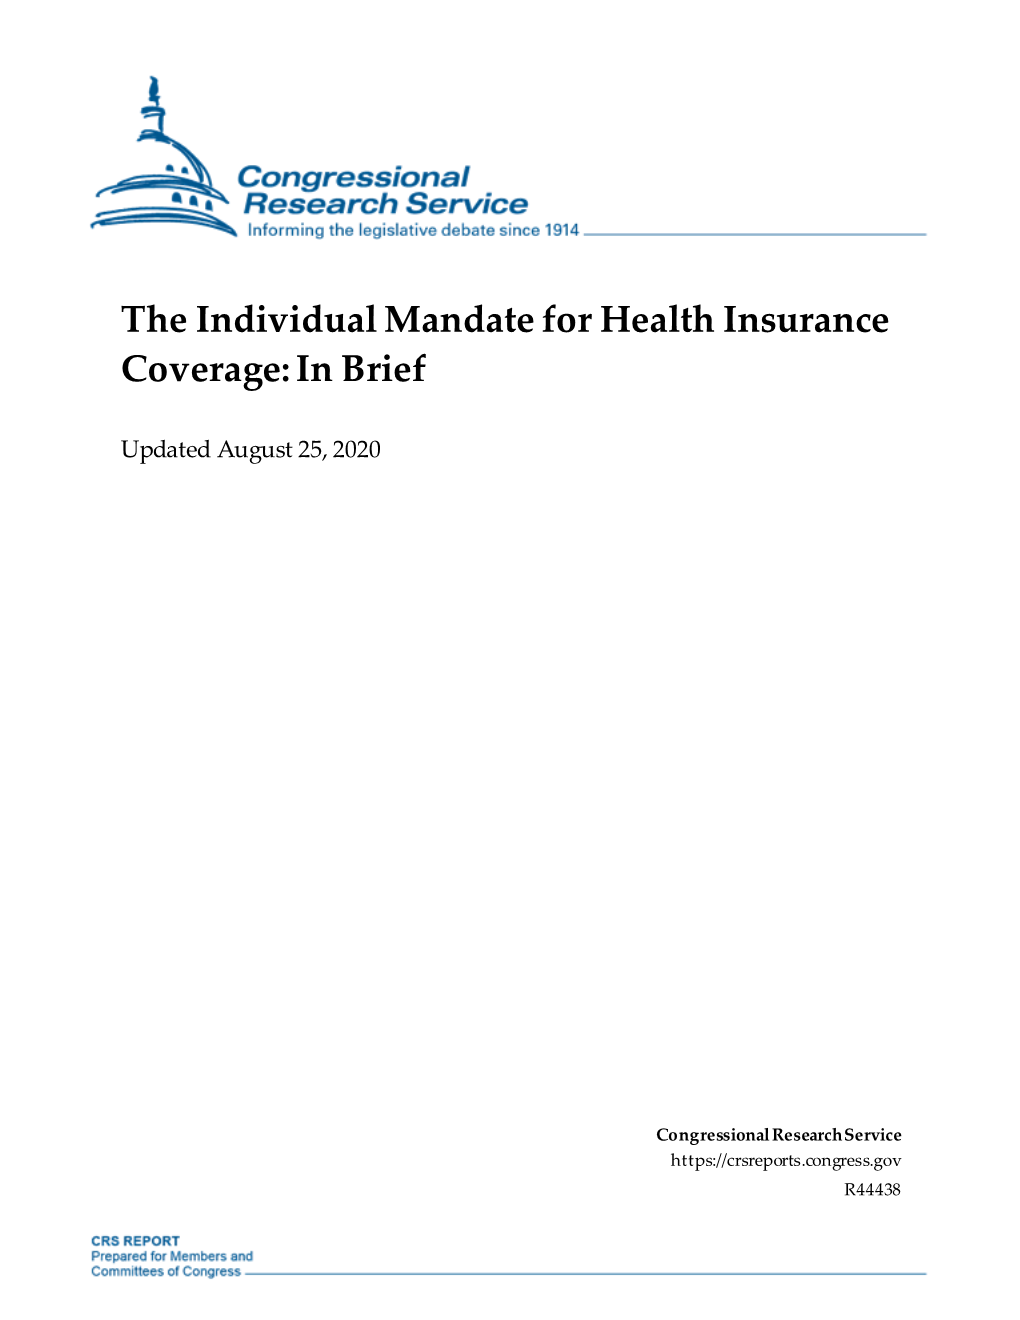 The Individual Mandate for Health Insurance Coverage: in Brief